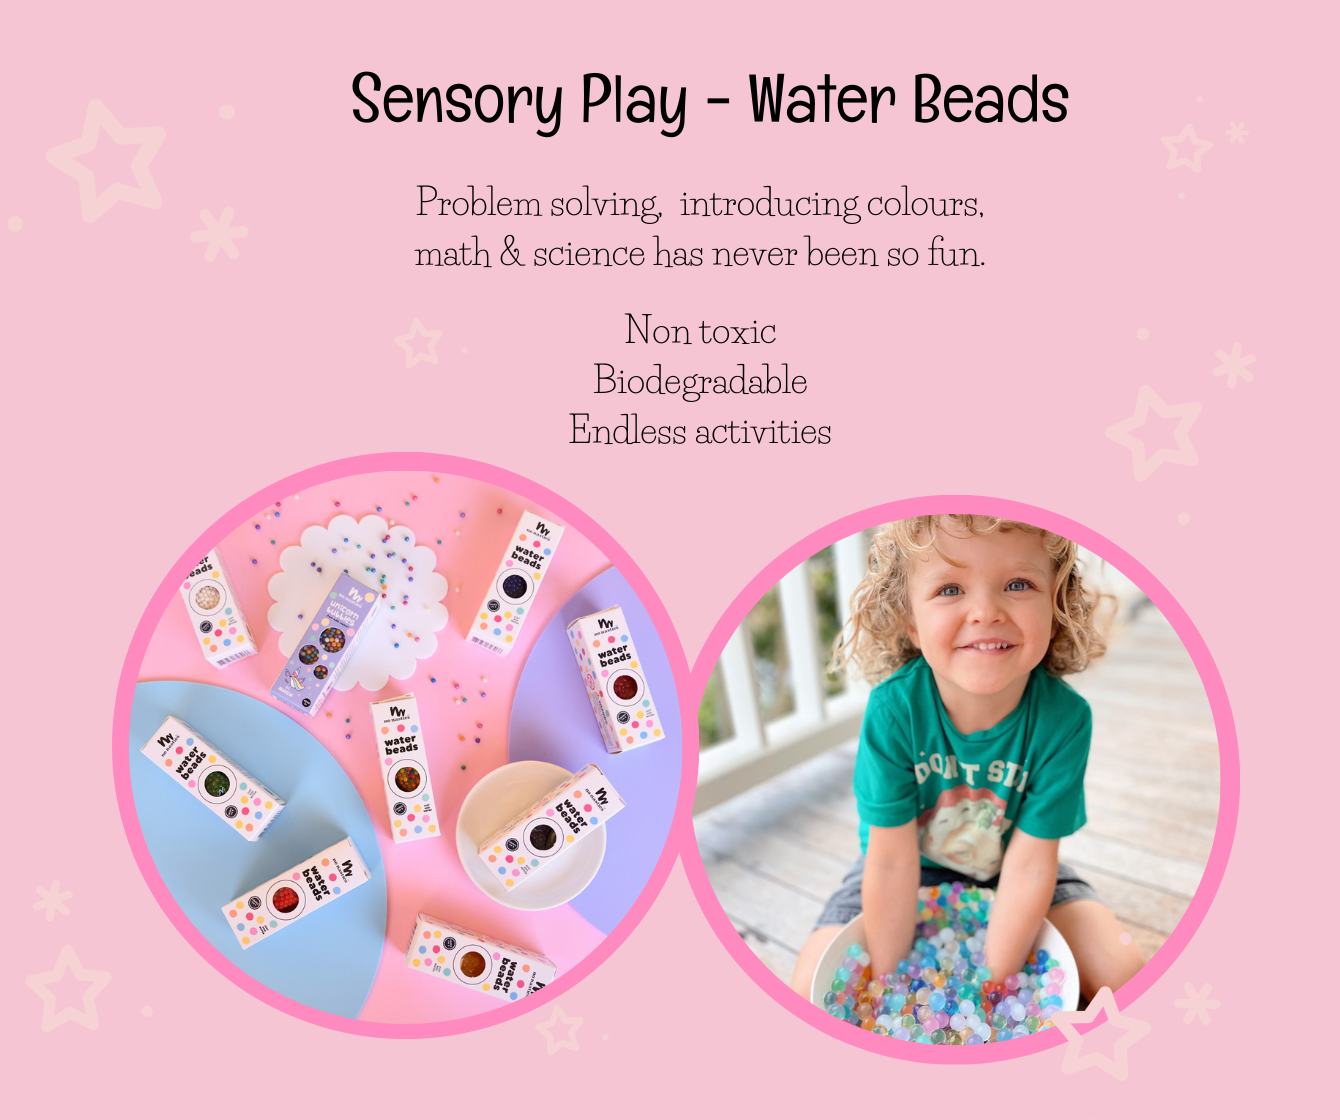 Sensory play ideas for kids using water beads